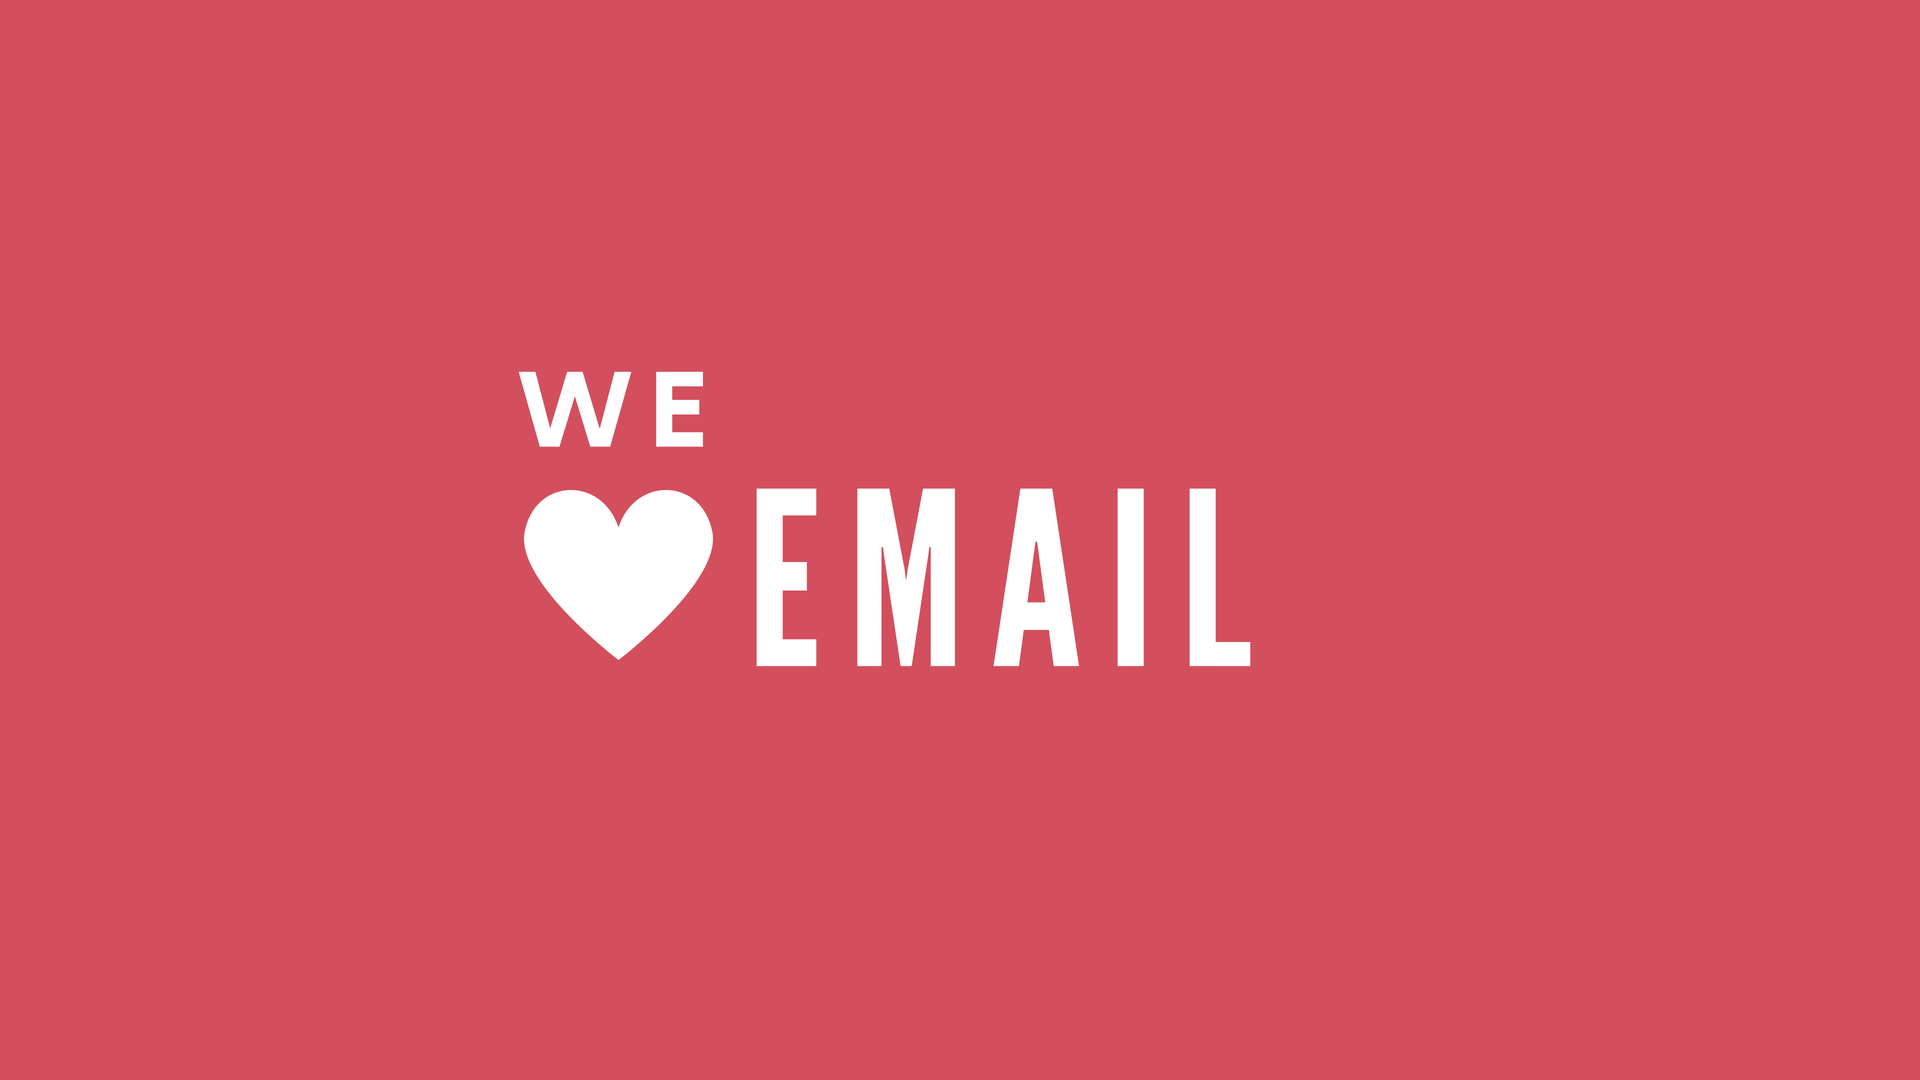 Why do email marketing?